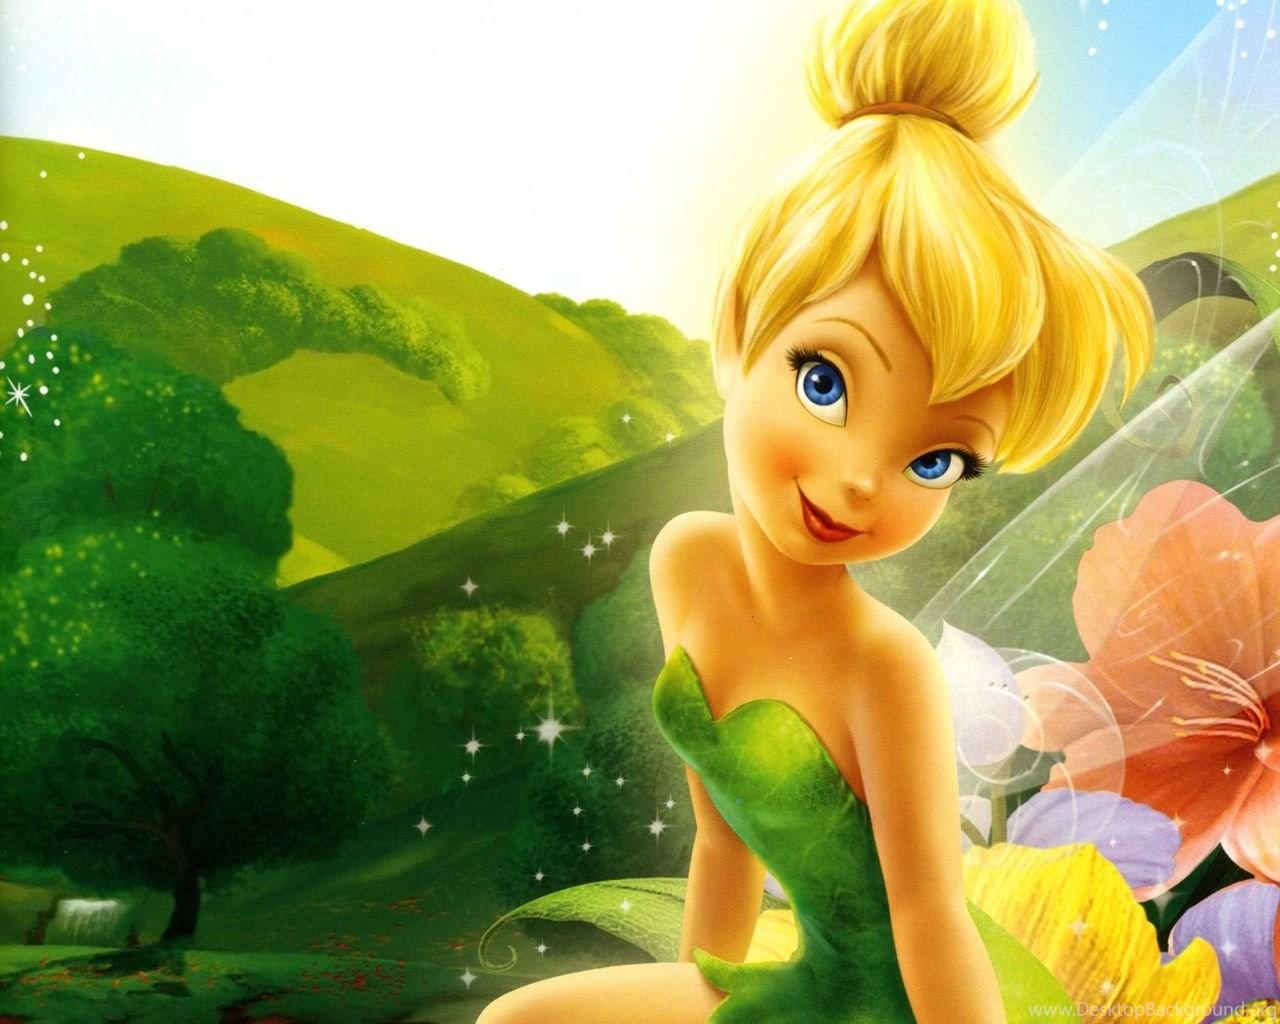 Tinkerbell Disney Wallpapers - Top Free Tinkerbell Disney Backgrounds ...